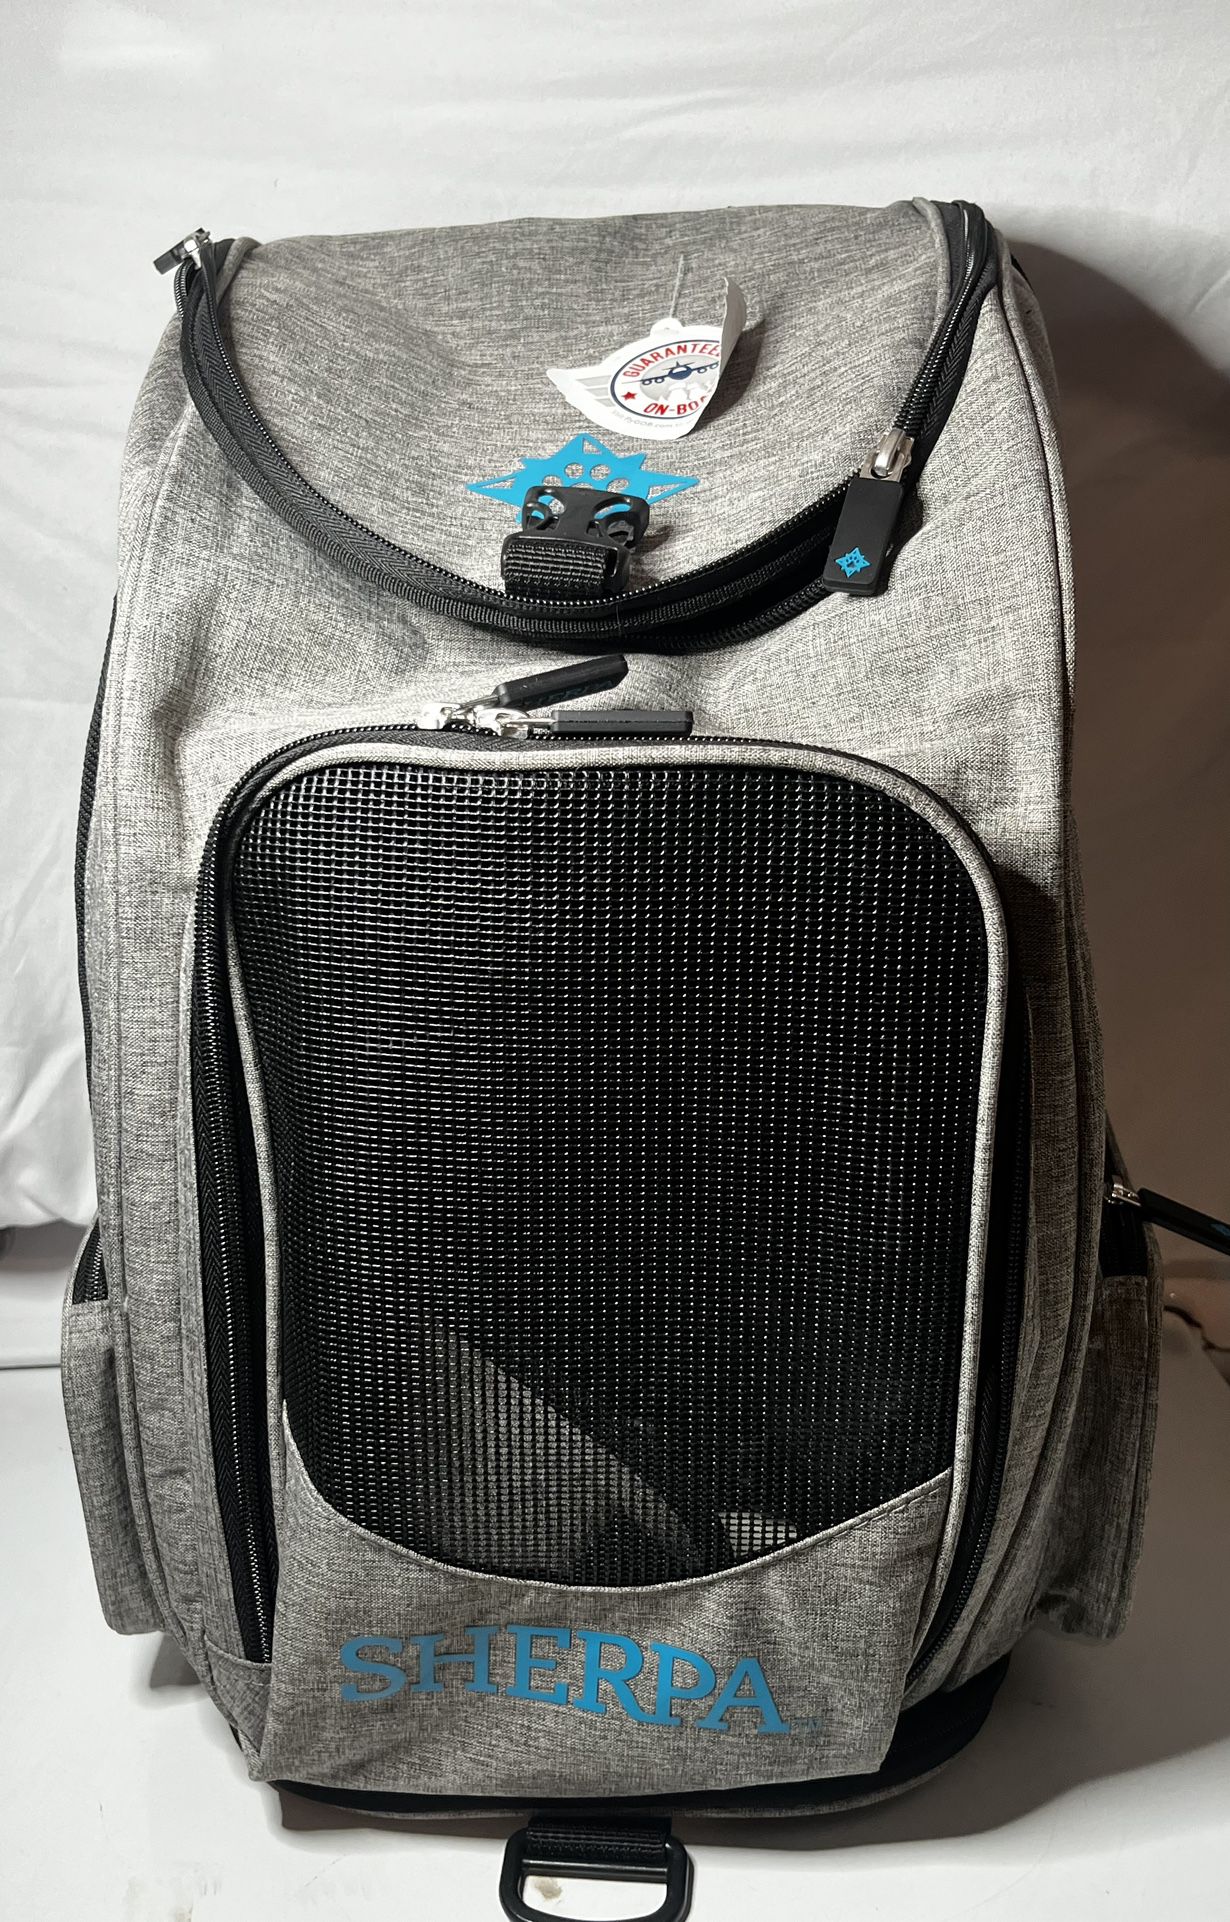  Sherpa Airline Approved Pet Travel Backpack 